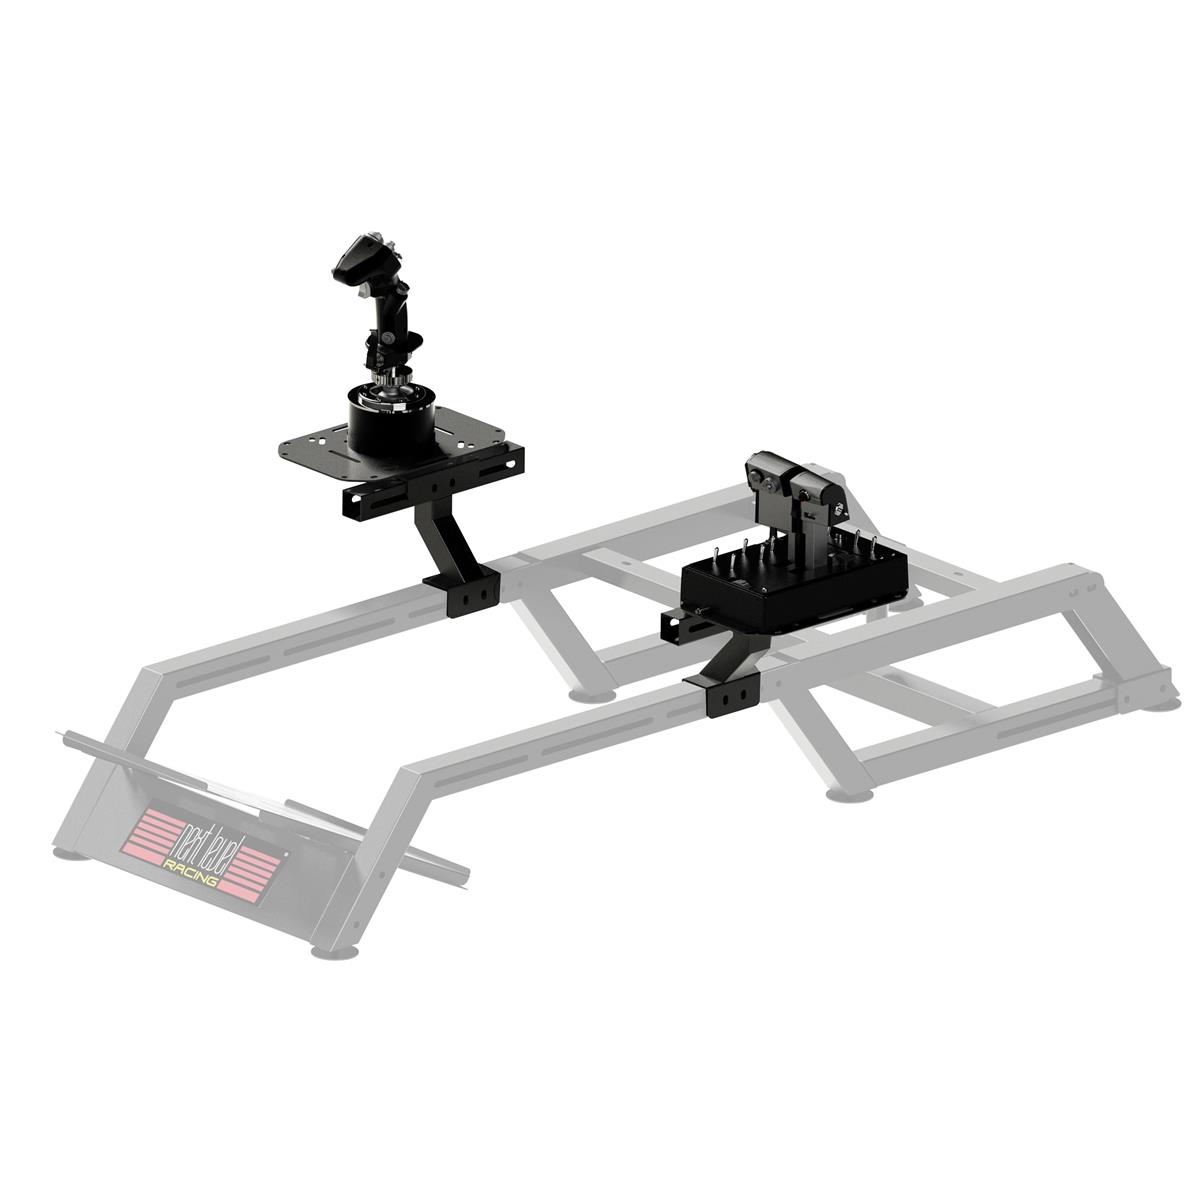 Image of Next Level Racing Combat Flight Pack for F-GT and GTtrack Cockpit